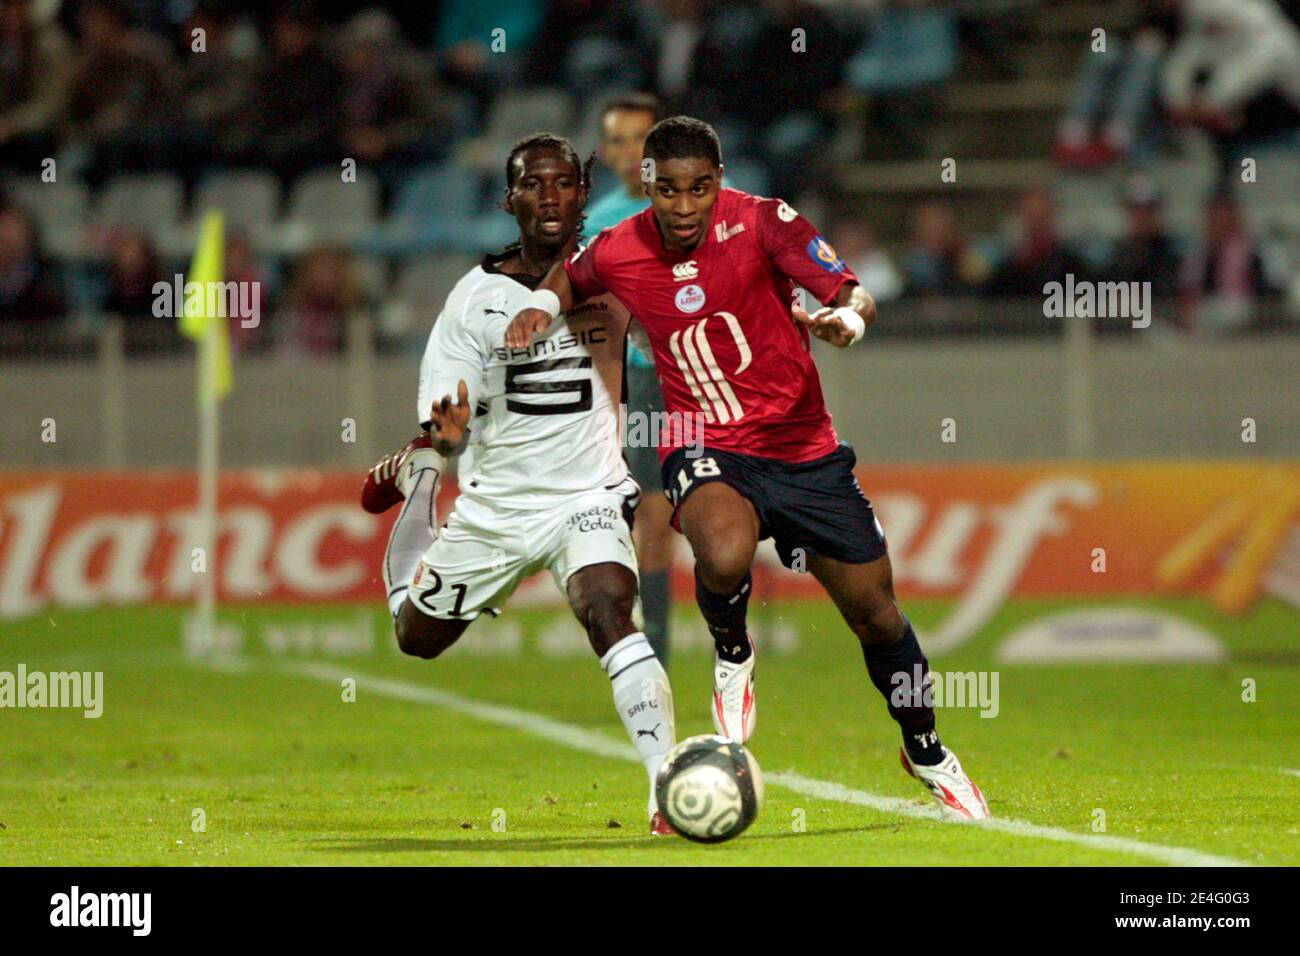 Lille's Franck Beria fights for the ball with Rennes' Ismael Bangoura during the French First League Soccer Match, Lille OSC vs Stade Rennais at Lille Metropole Stadium in Lille, north of France on October 17, 2009. The match ended in a 0-0 draw. Photo by Stock Photo